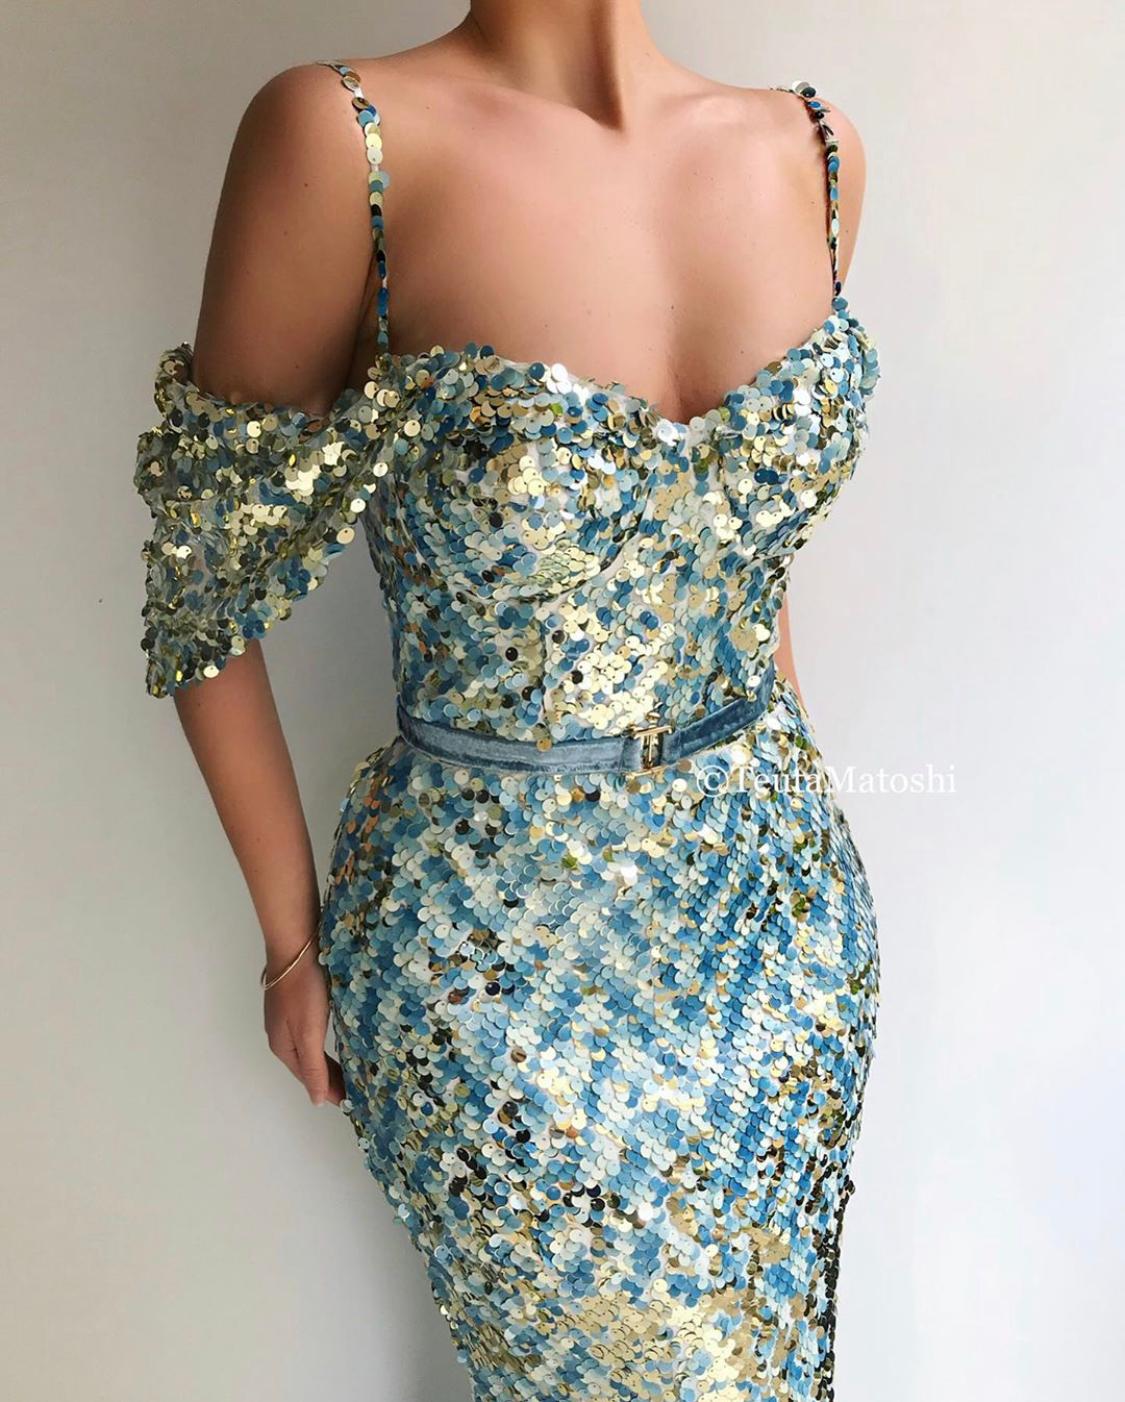 Blue mermaid dress with spaghetti straps, off the shoulder sleeves and sequins